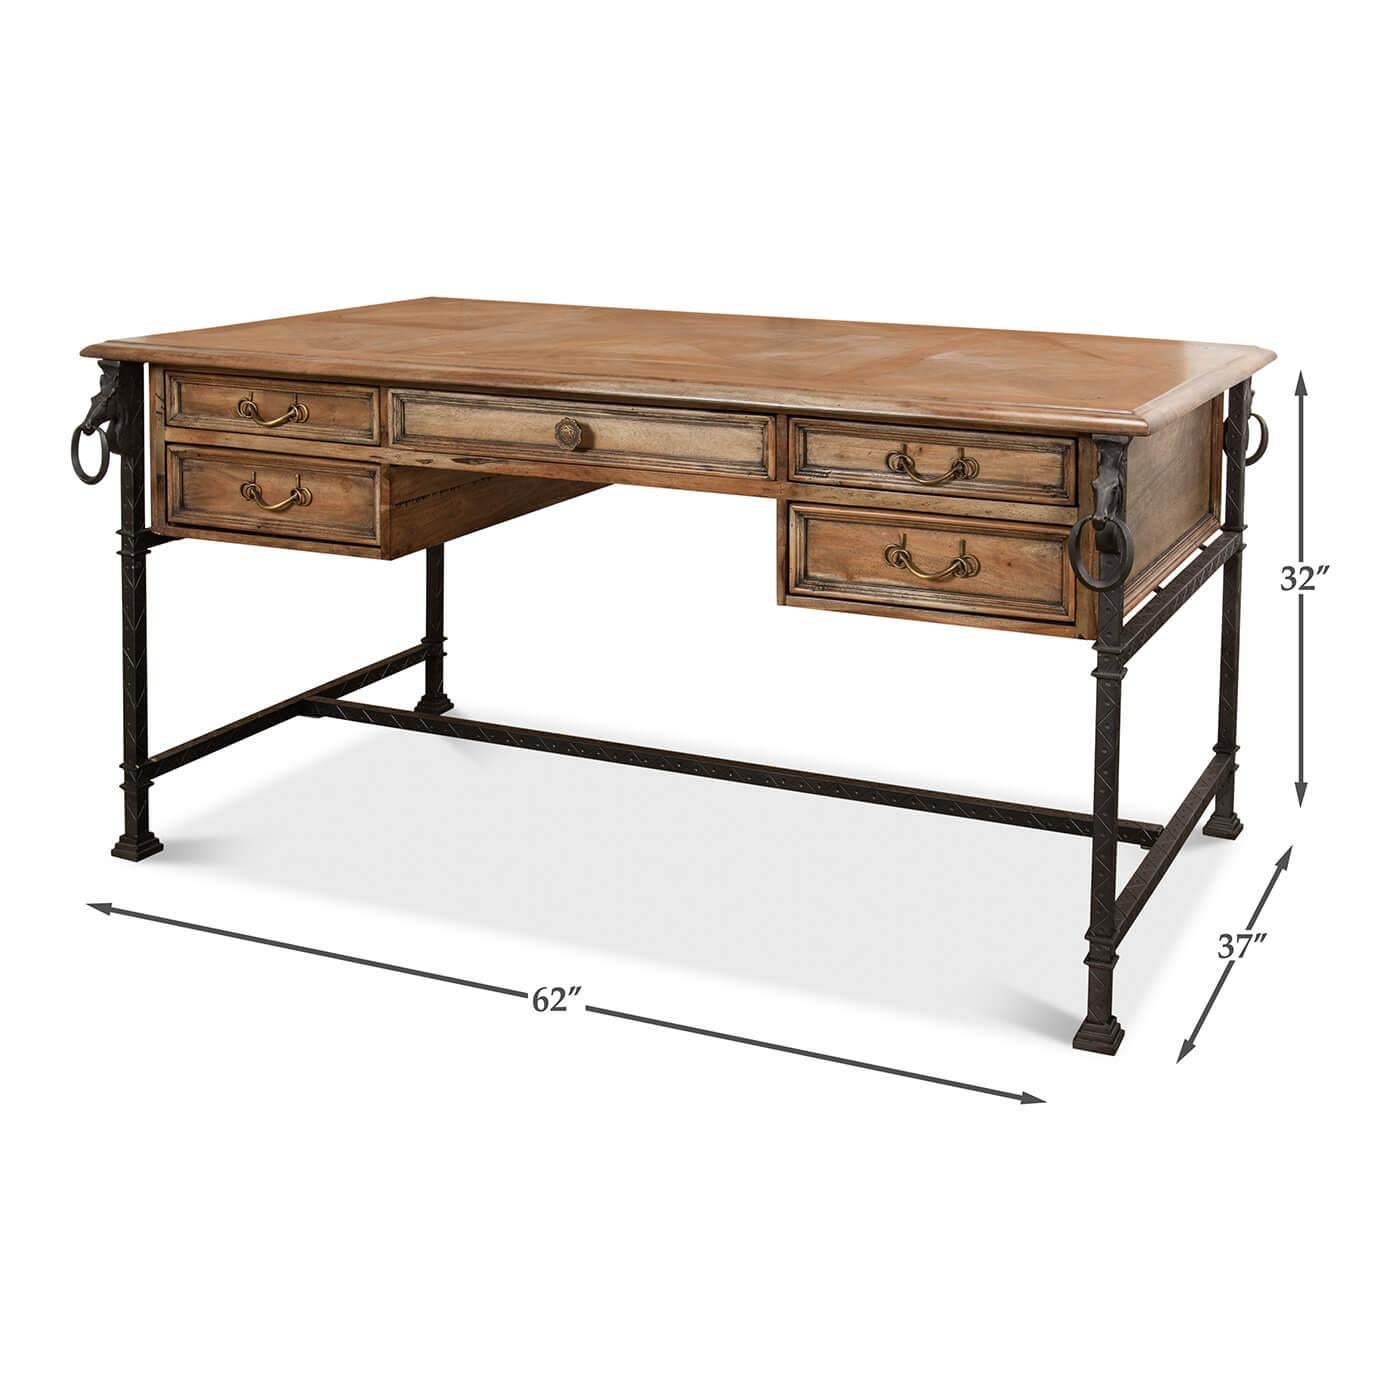 Iron Industrial Equestrian Desk For Sale